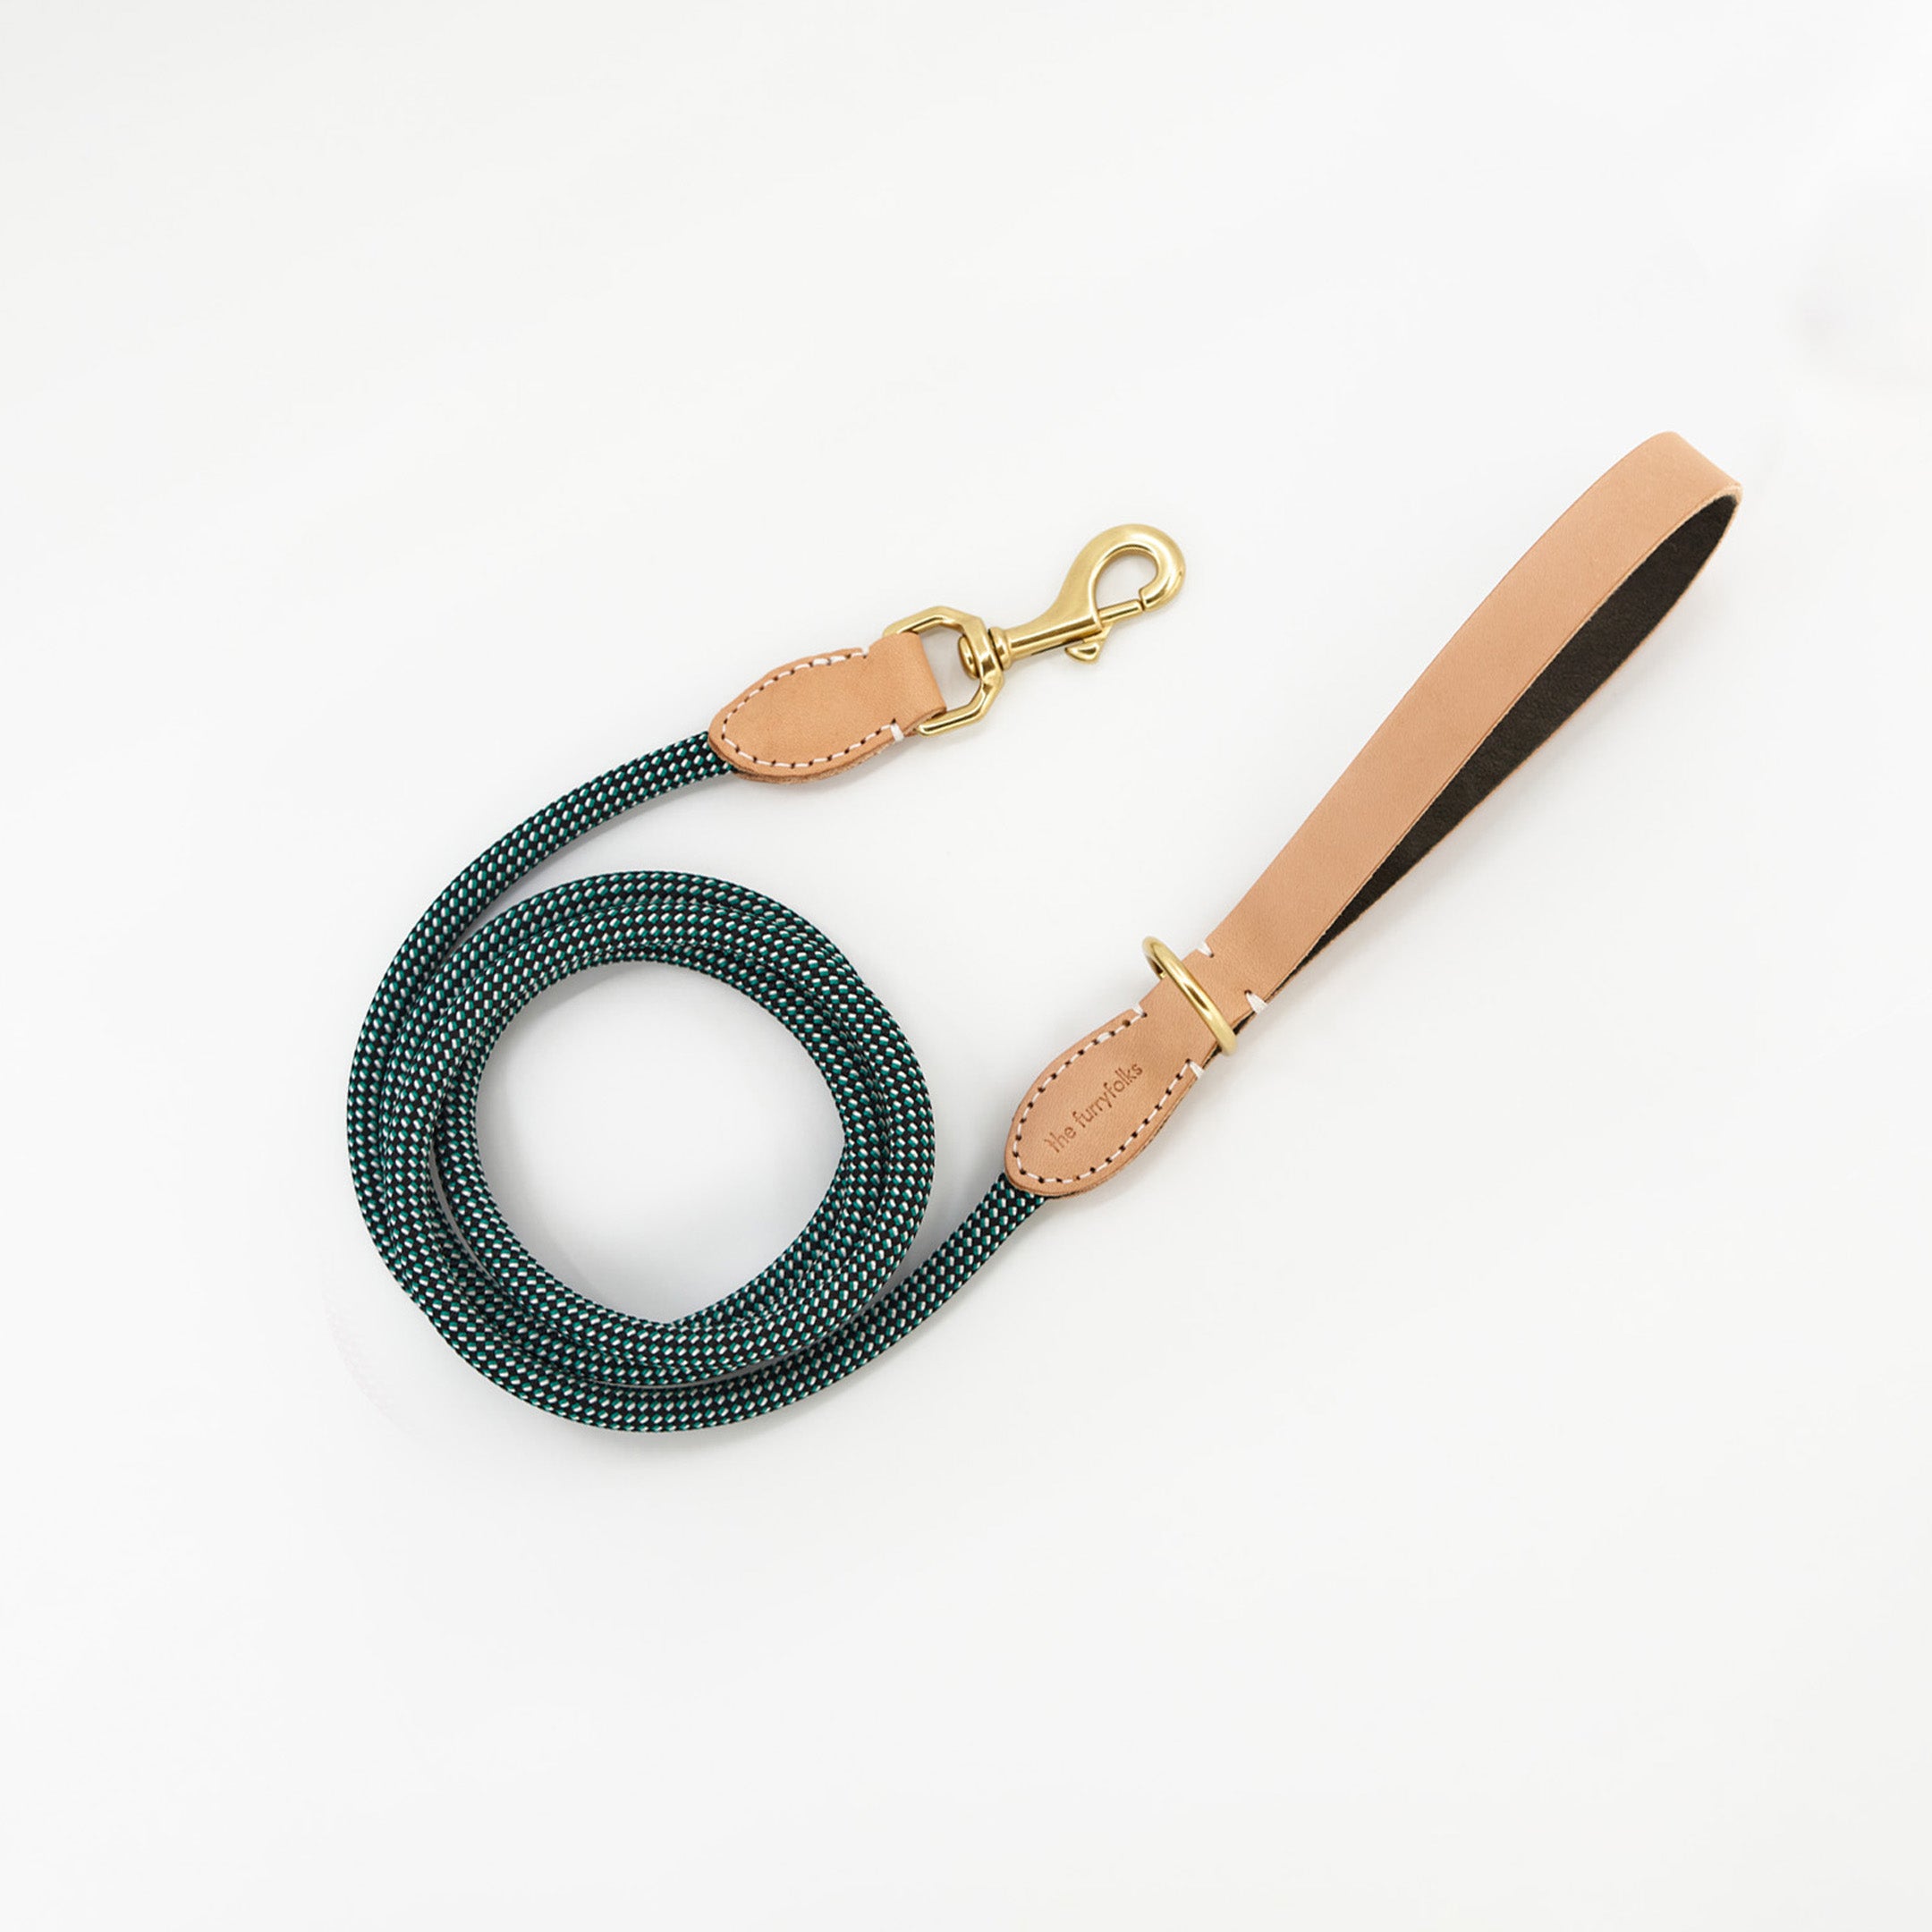 The image displays a teal and black woven dog leash with tan leather details and gold-tone metal hardware. It features a branded leather patch that reads "The Furryfolks," indicating its designer or brand. The leash is coiled, with the handle clearly visible, demonstrating its length and flexibility. The simple, clean white background ensures the focus is on the leash's elegant design and color scheme.